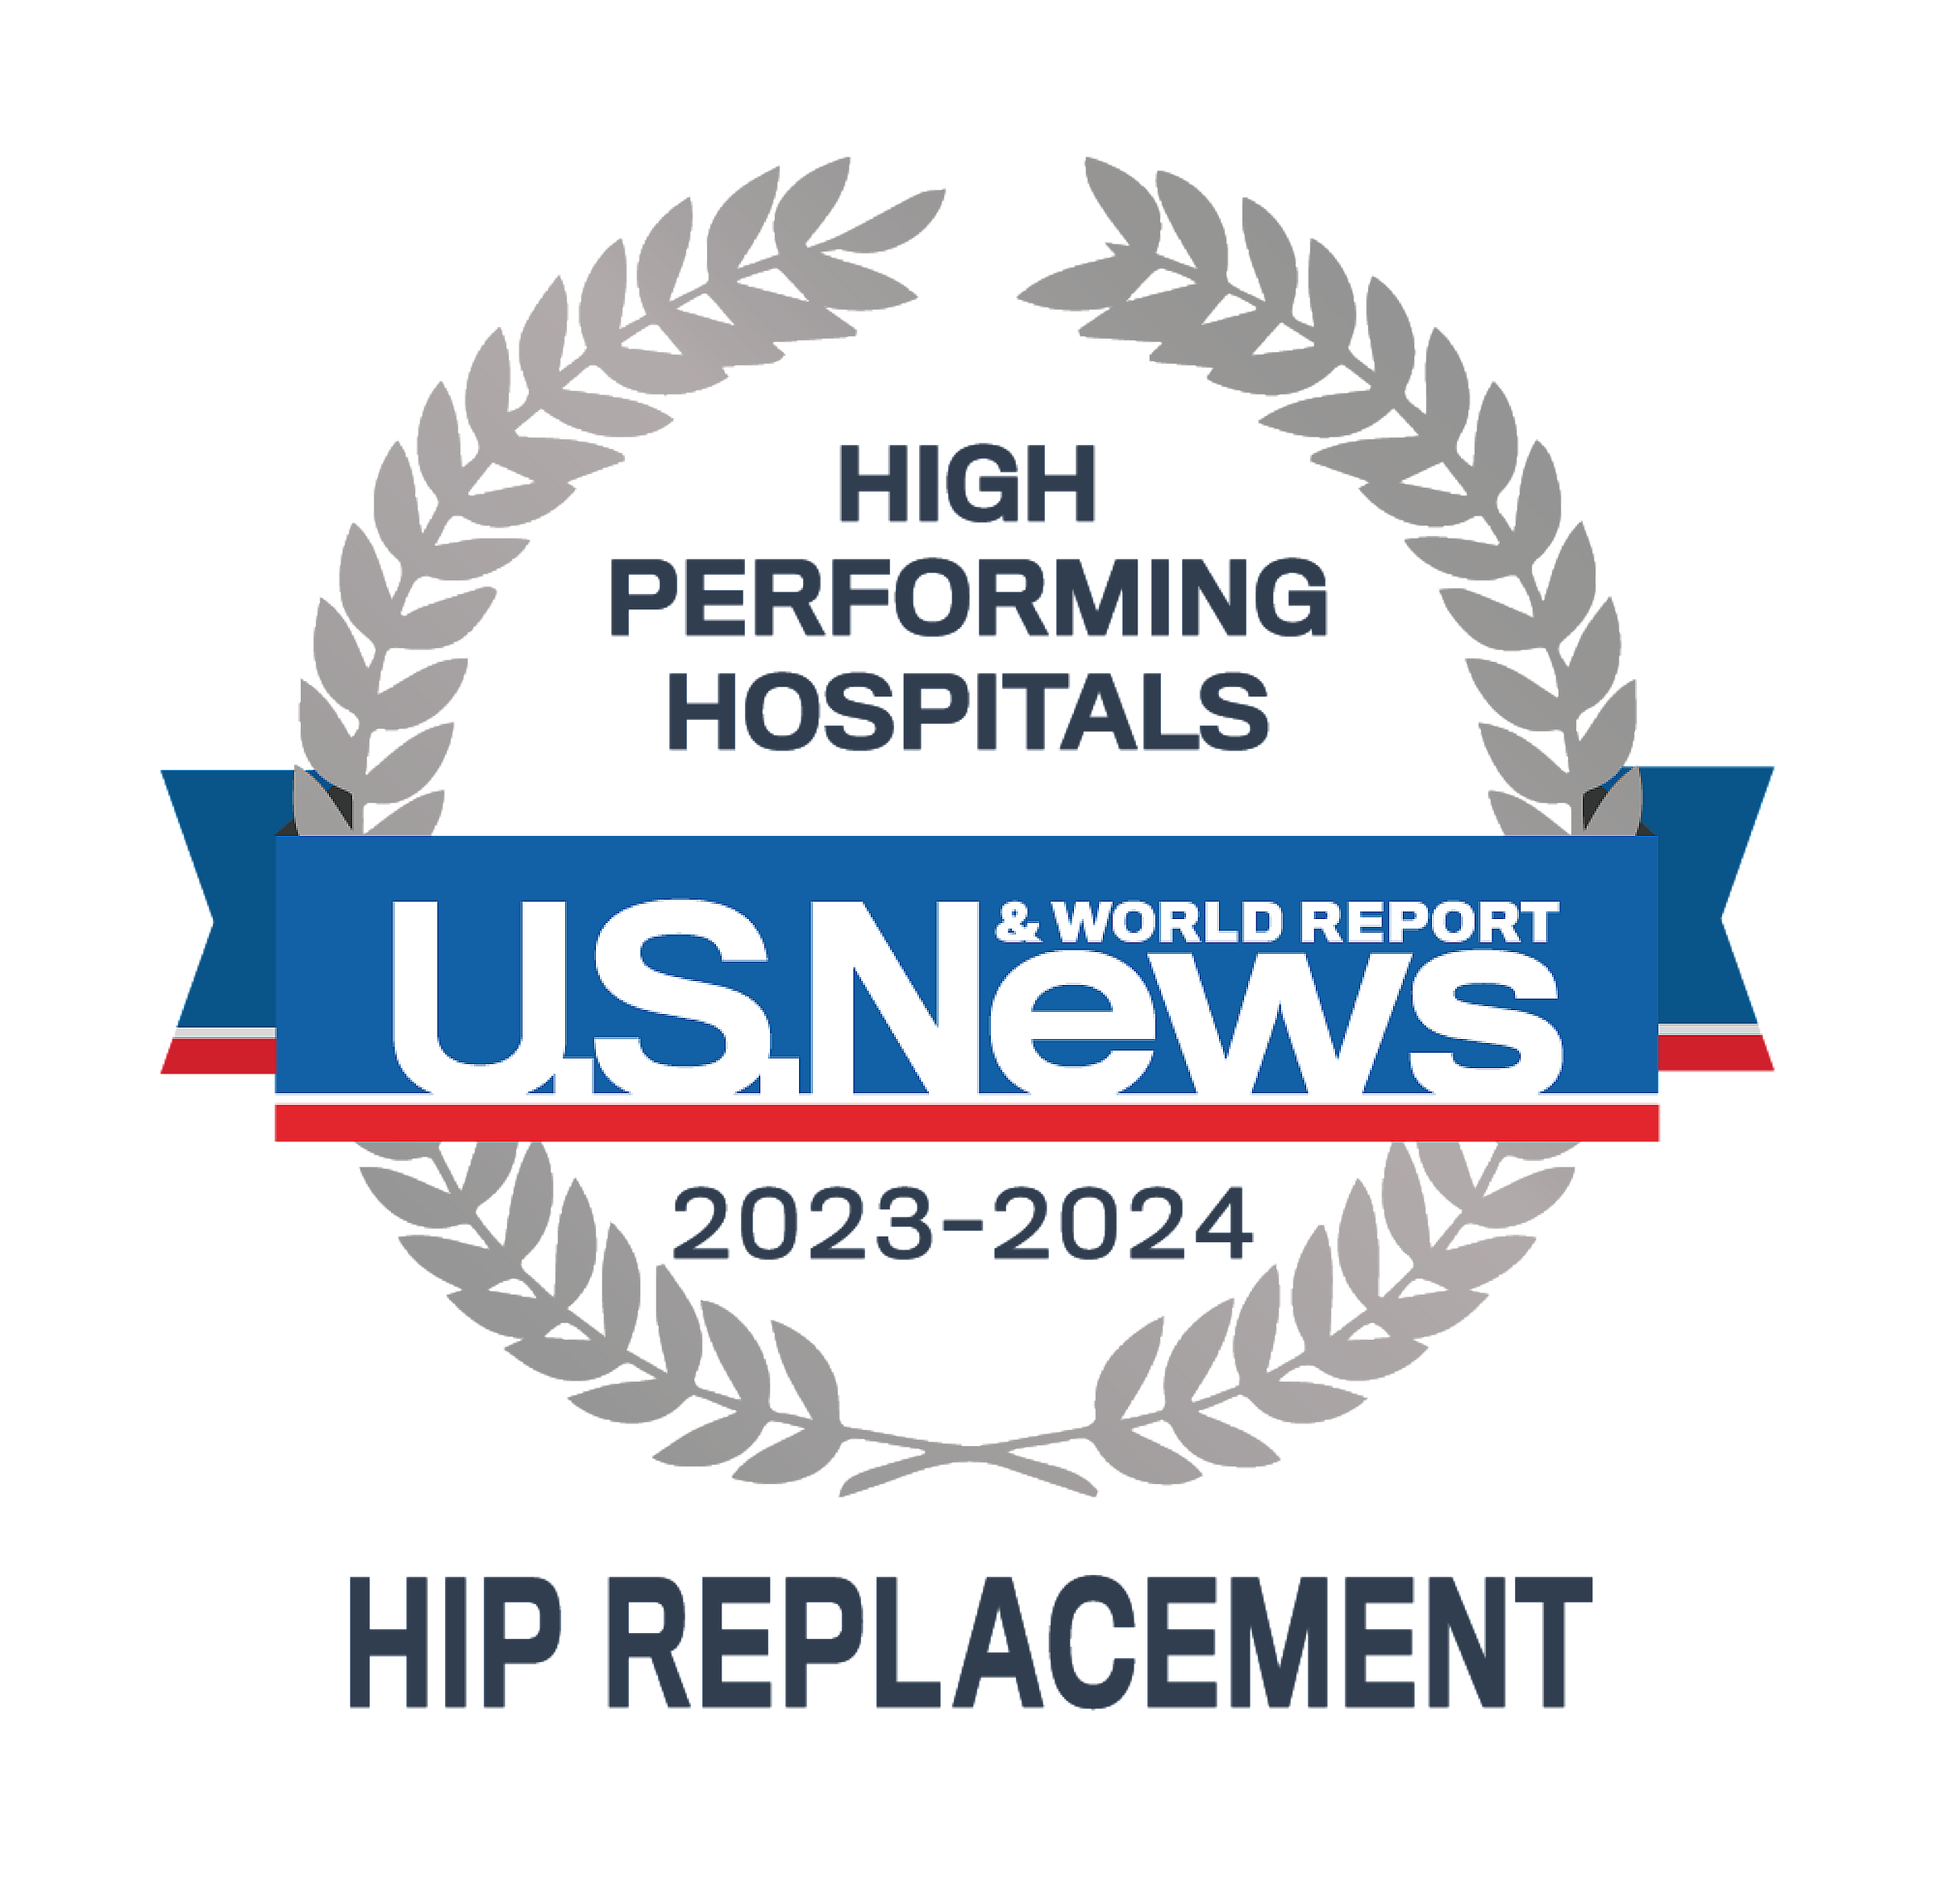 US News & World Report Hip Replacement High Performing Care 2023-2024